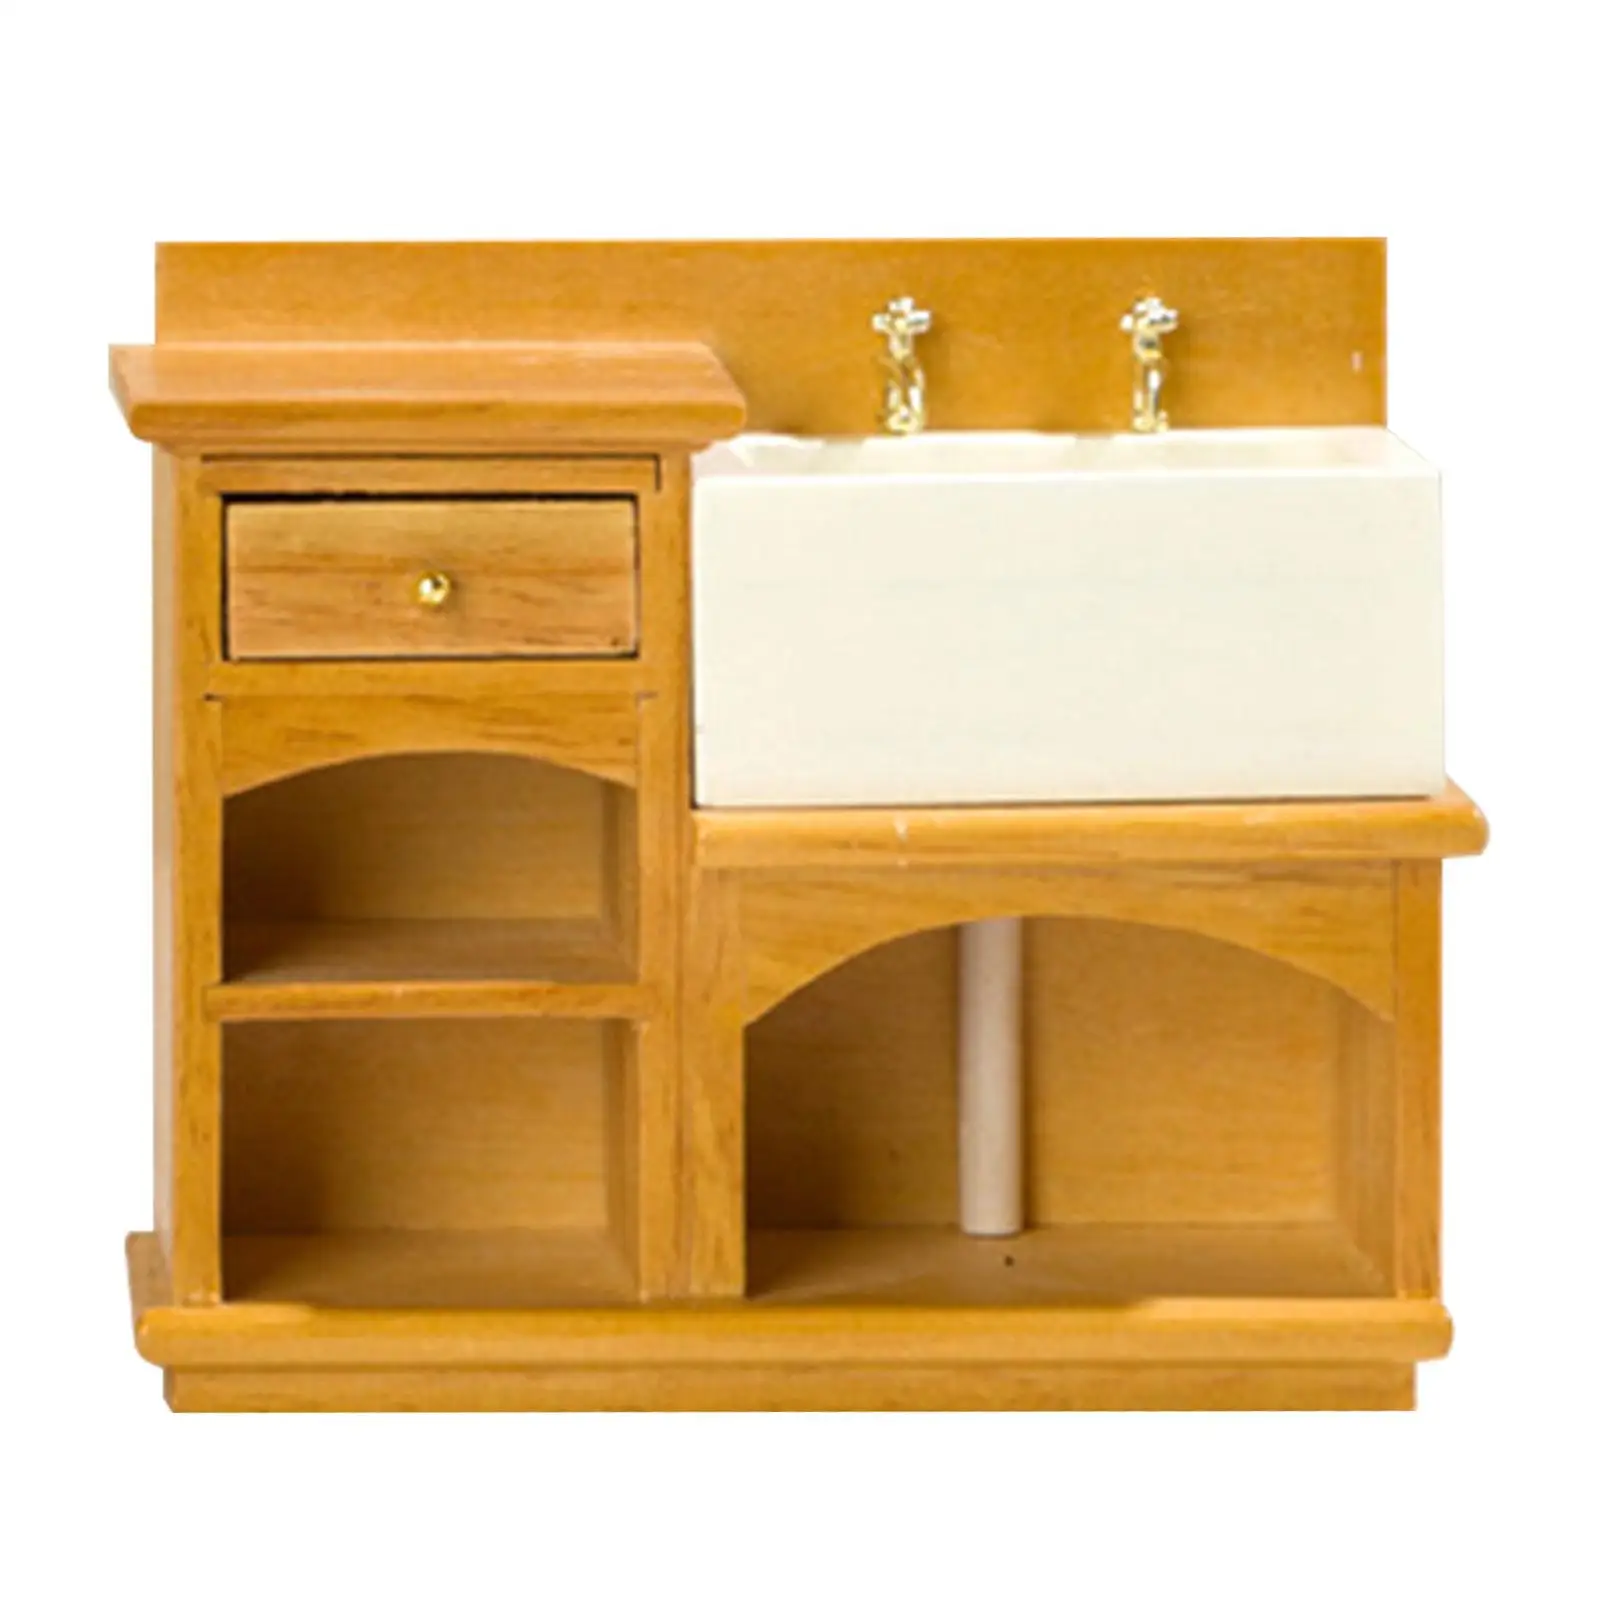 1/12 Dollhouse Wash Cabinet, 1:12 Dollhouse Wash Cabinet Model 1:12 Miniature Cabinet Furniture for Holiday Present Adults